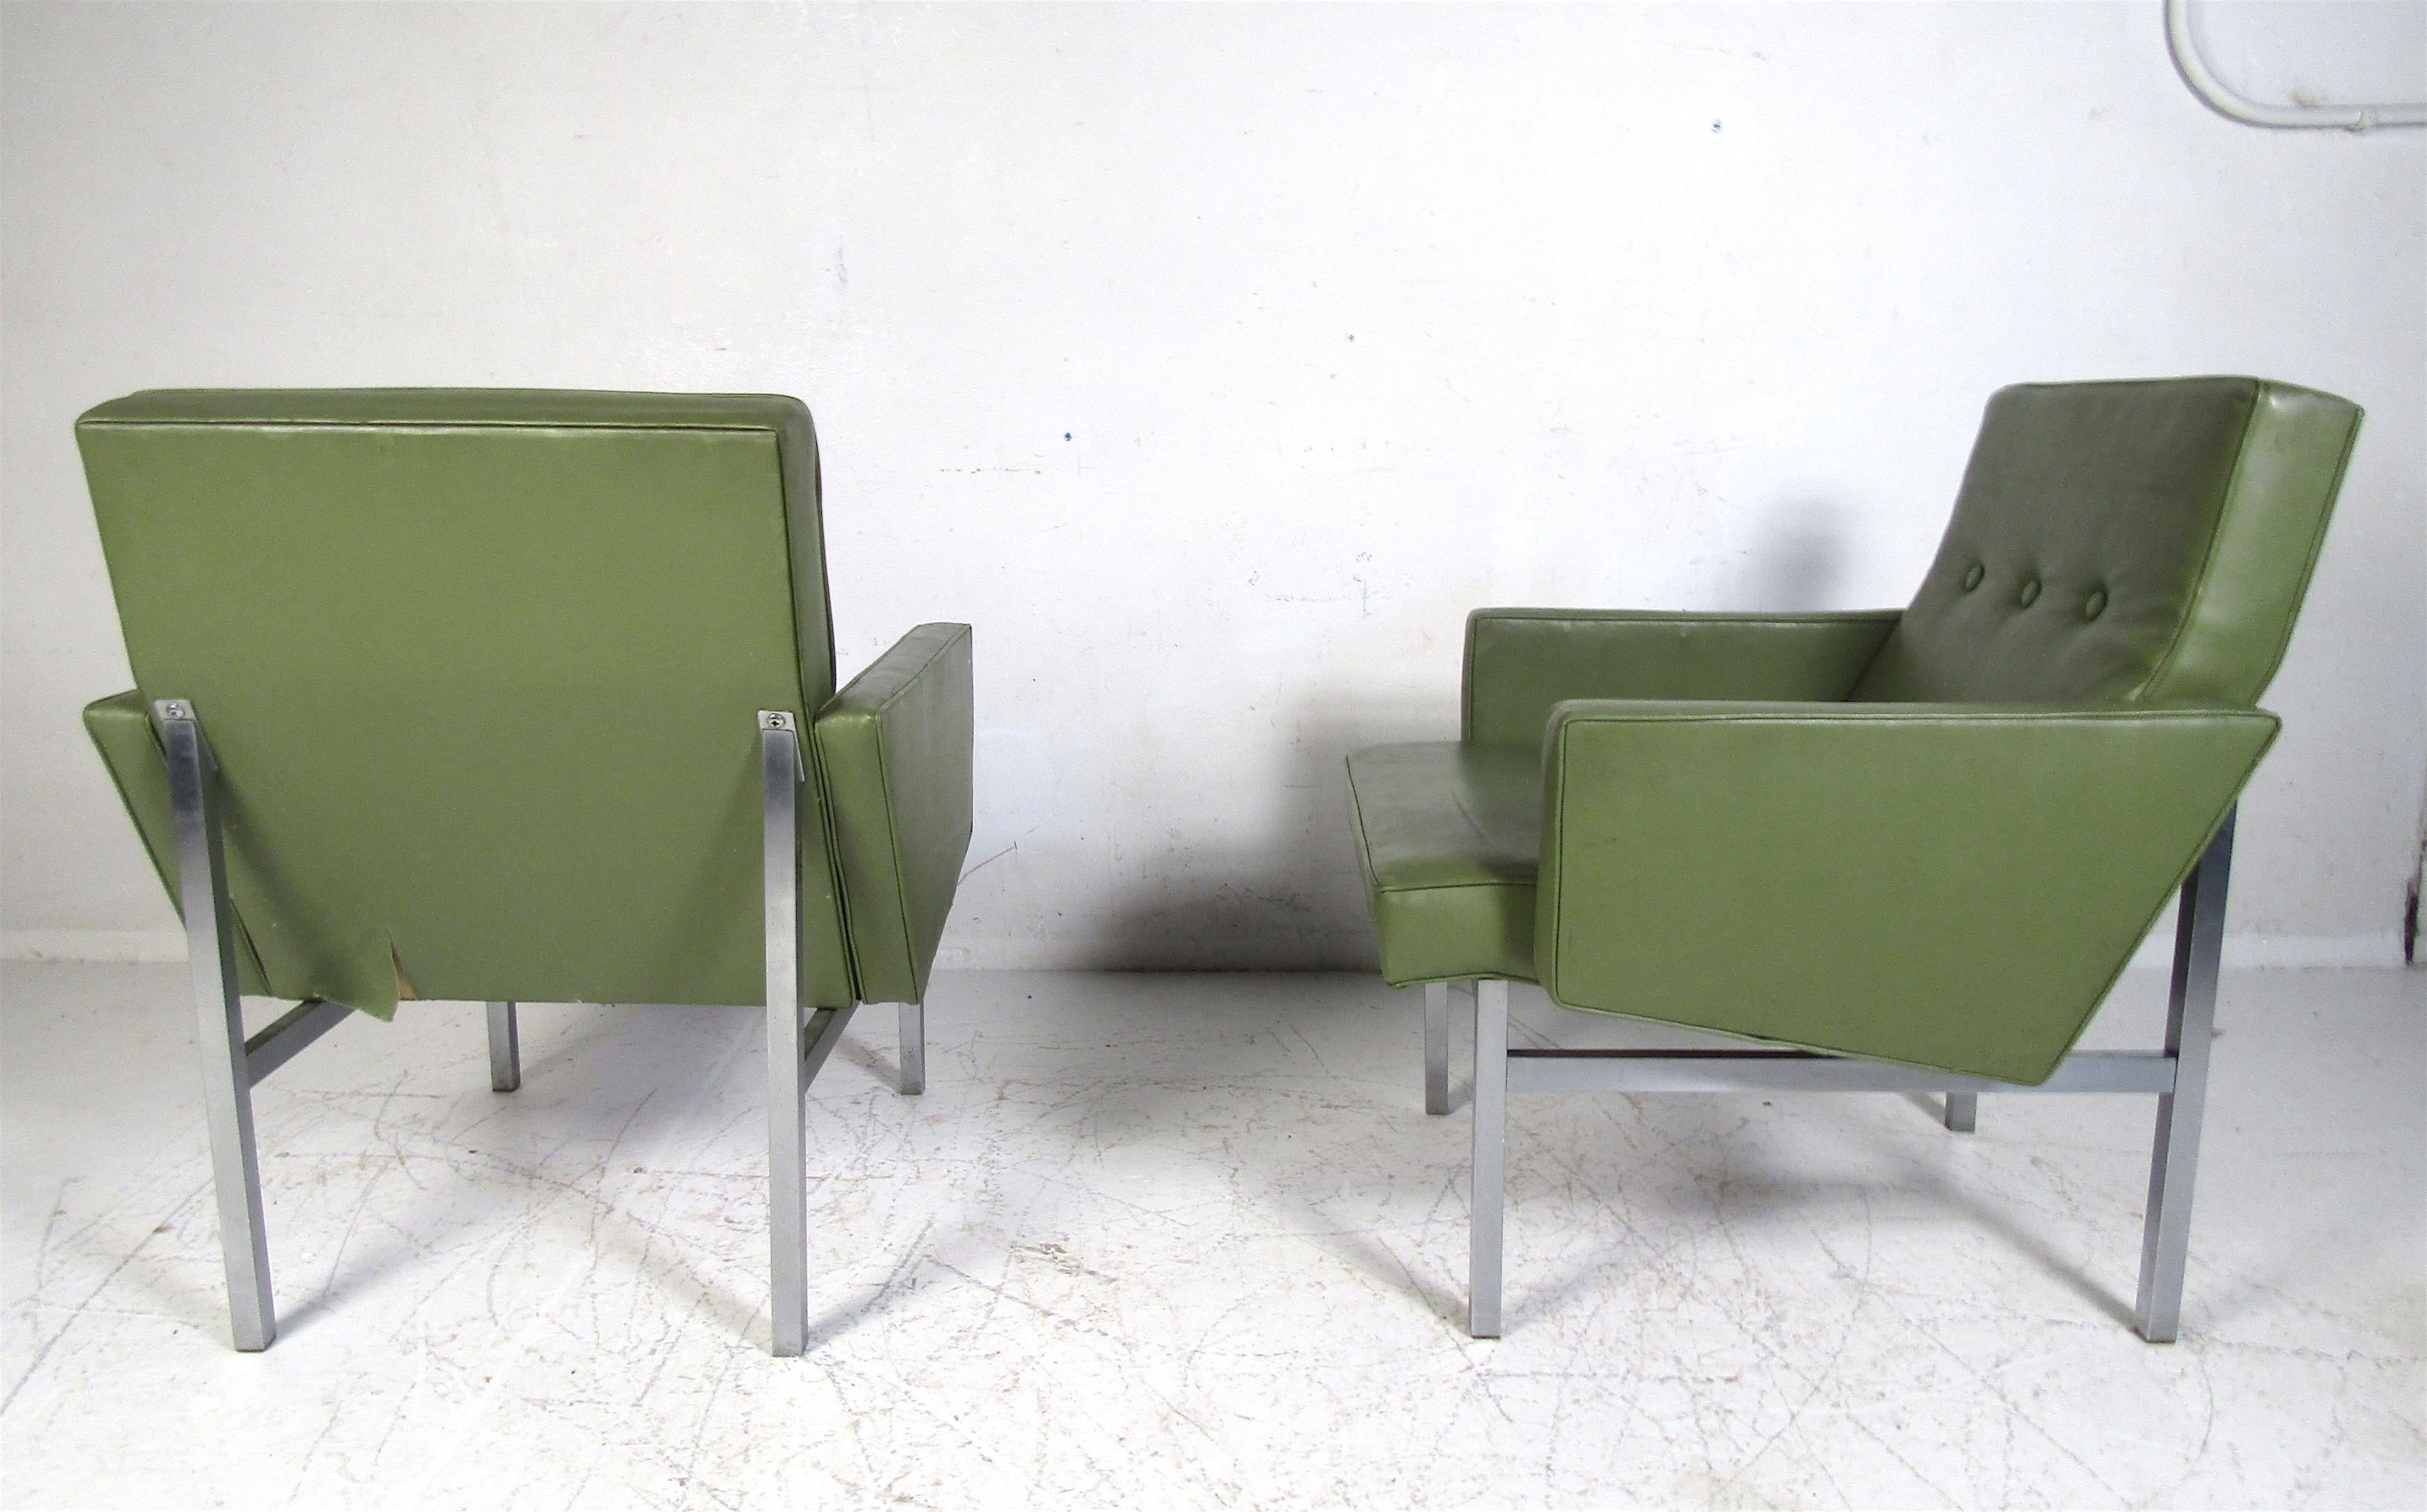 A beautiful pair of vintage modern armchairs with metal legs and tufted green vinyl upholstery. The wonderful design offers maximum comfort without sacrificing style. A perfect addition to any home, business, or office. Please confirm the item